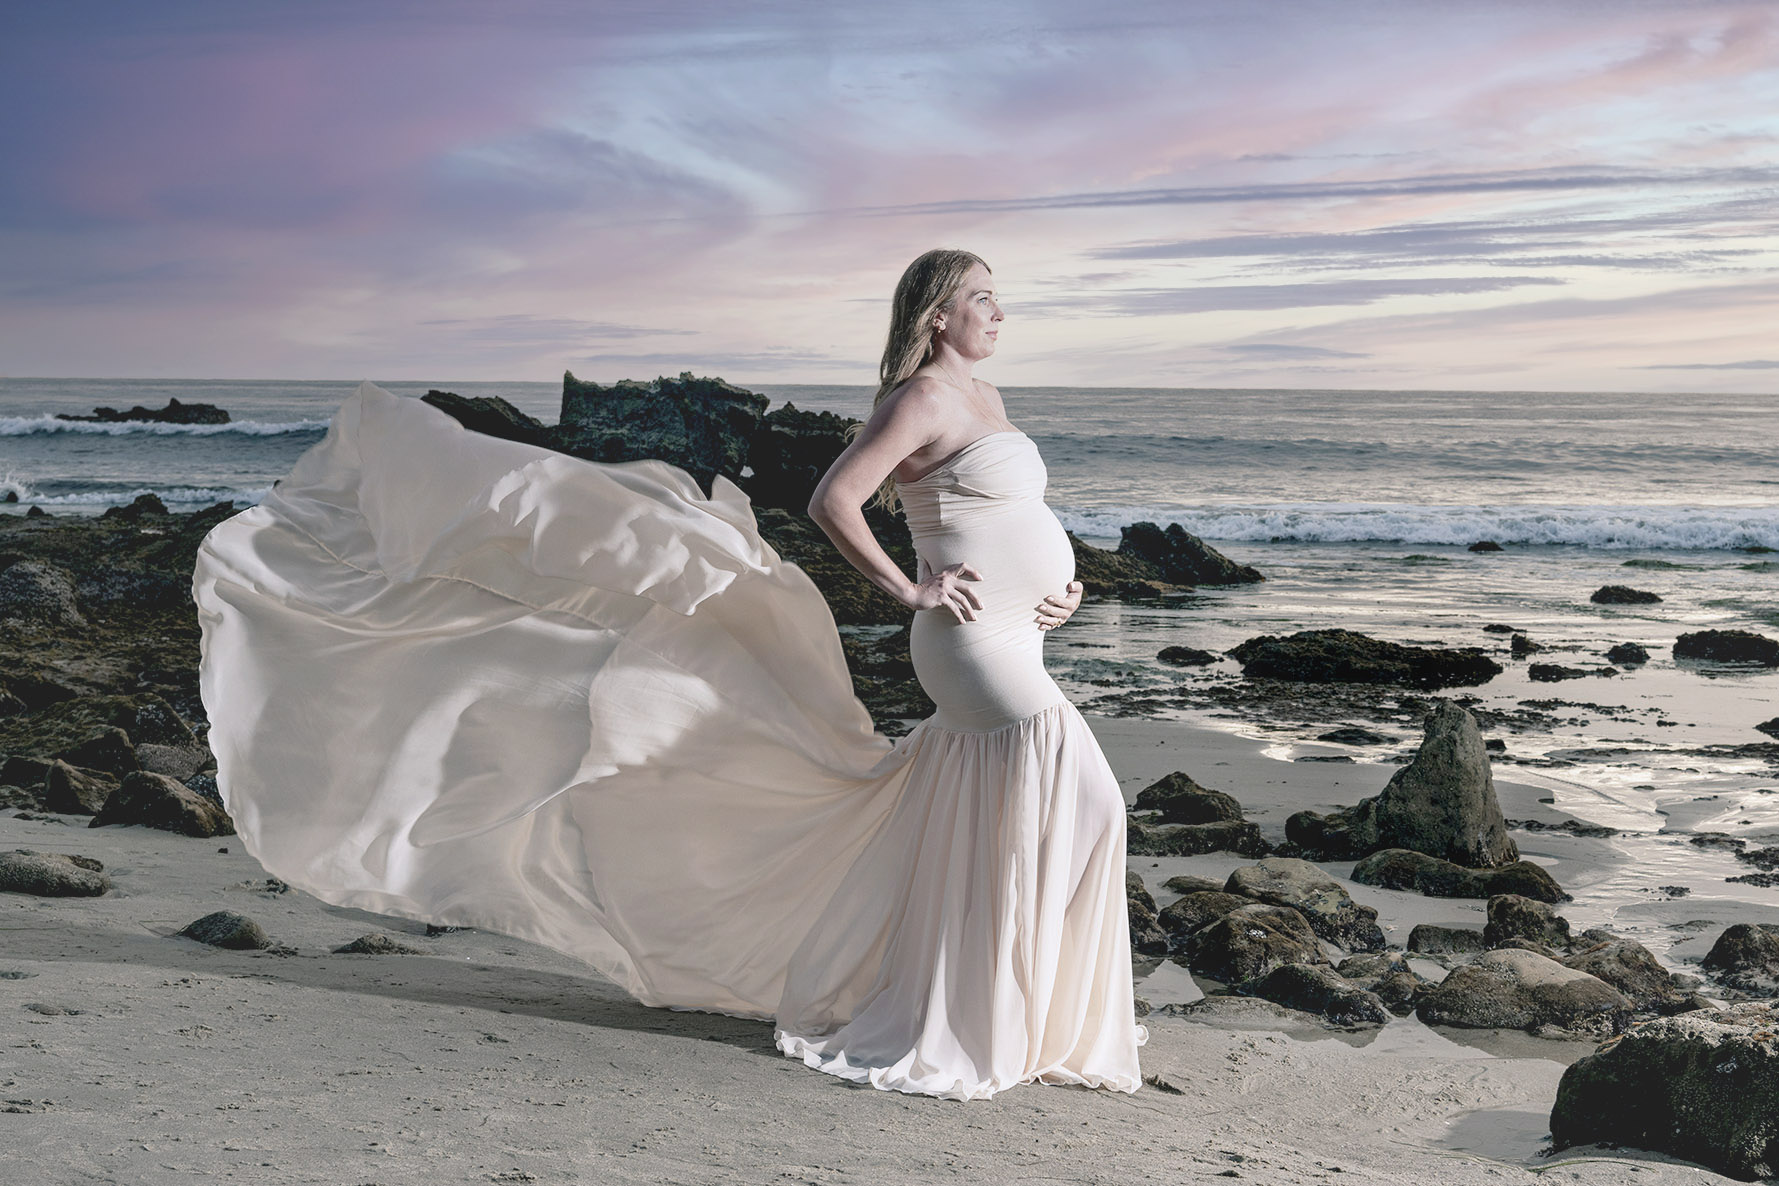 This is a pregnant woman in a long white gown standing on the beach